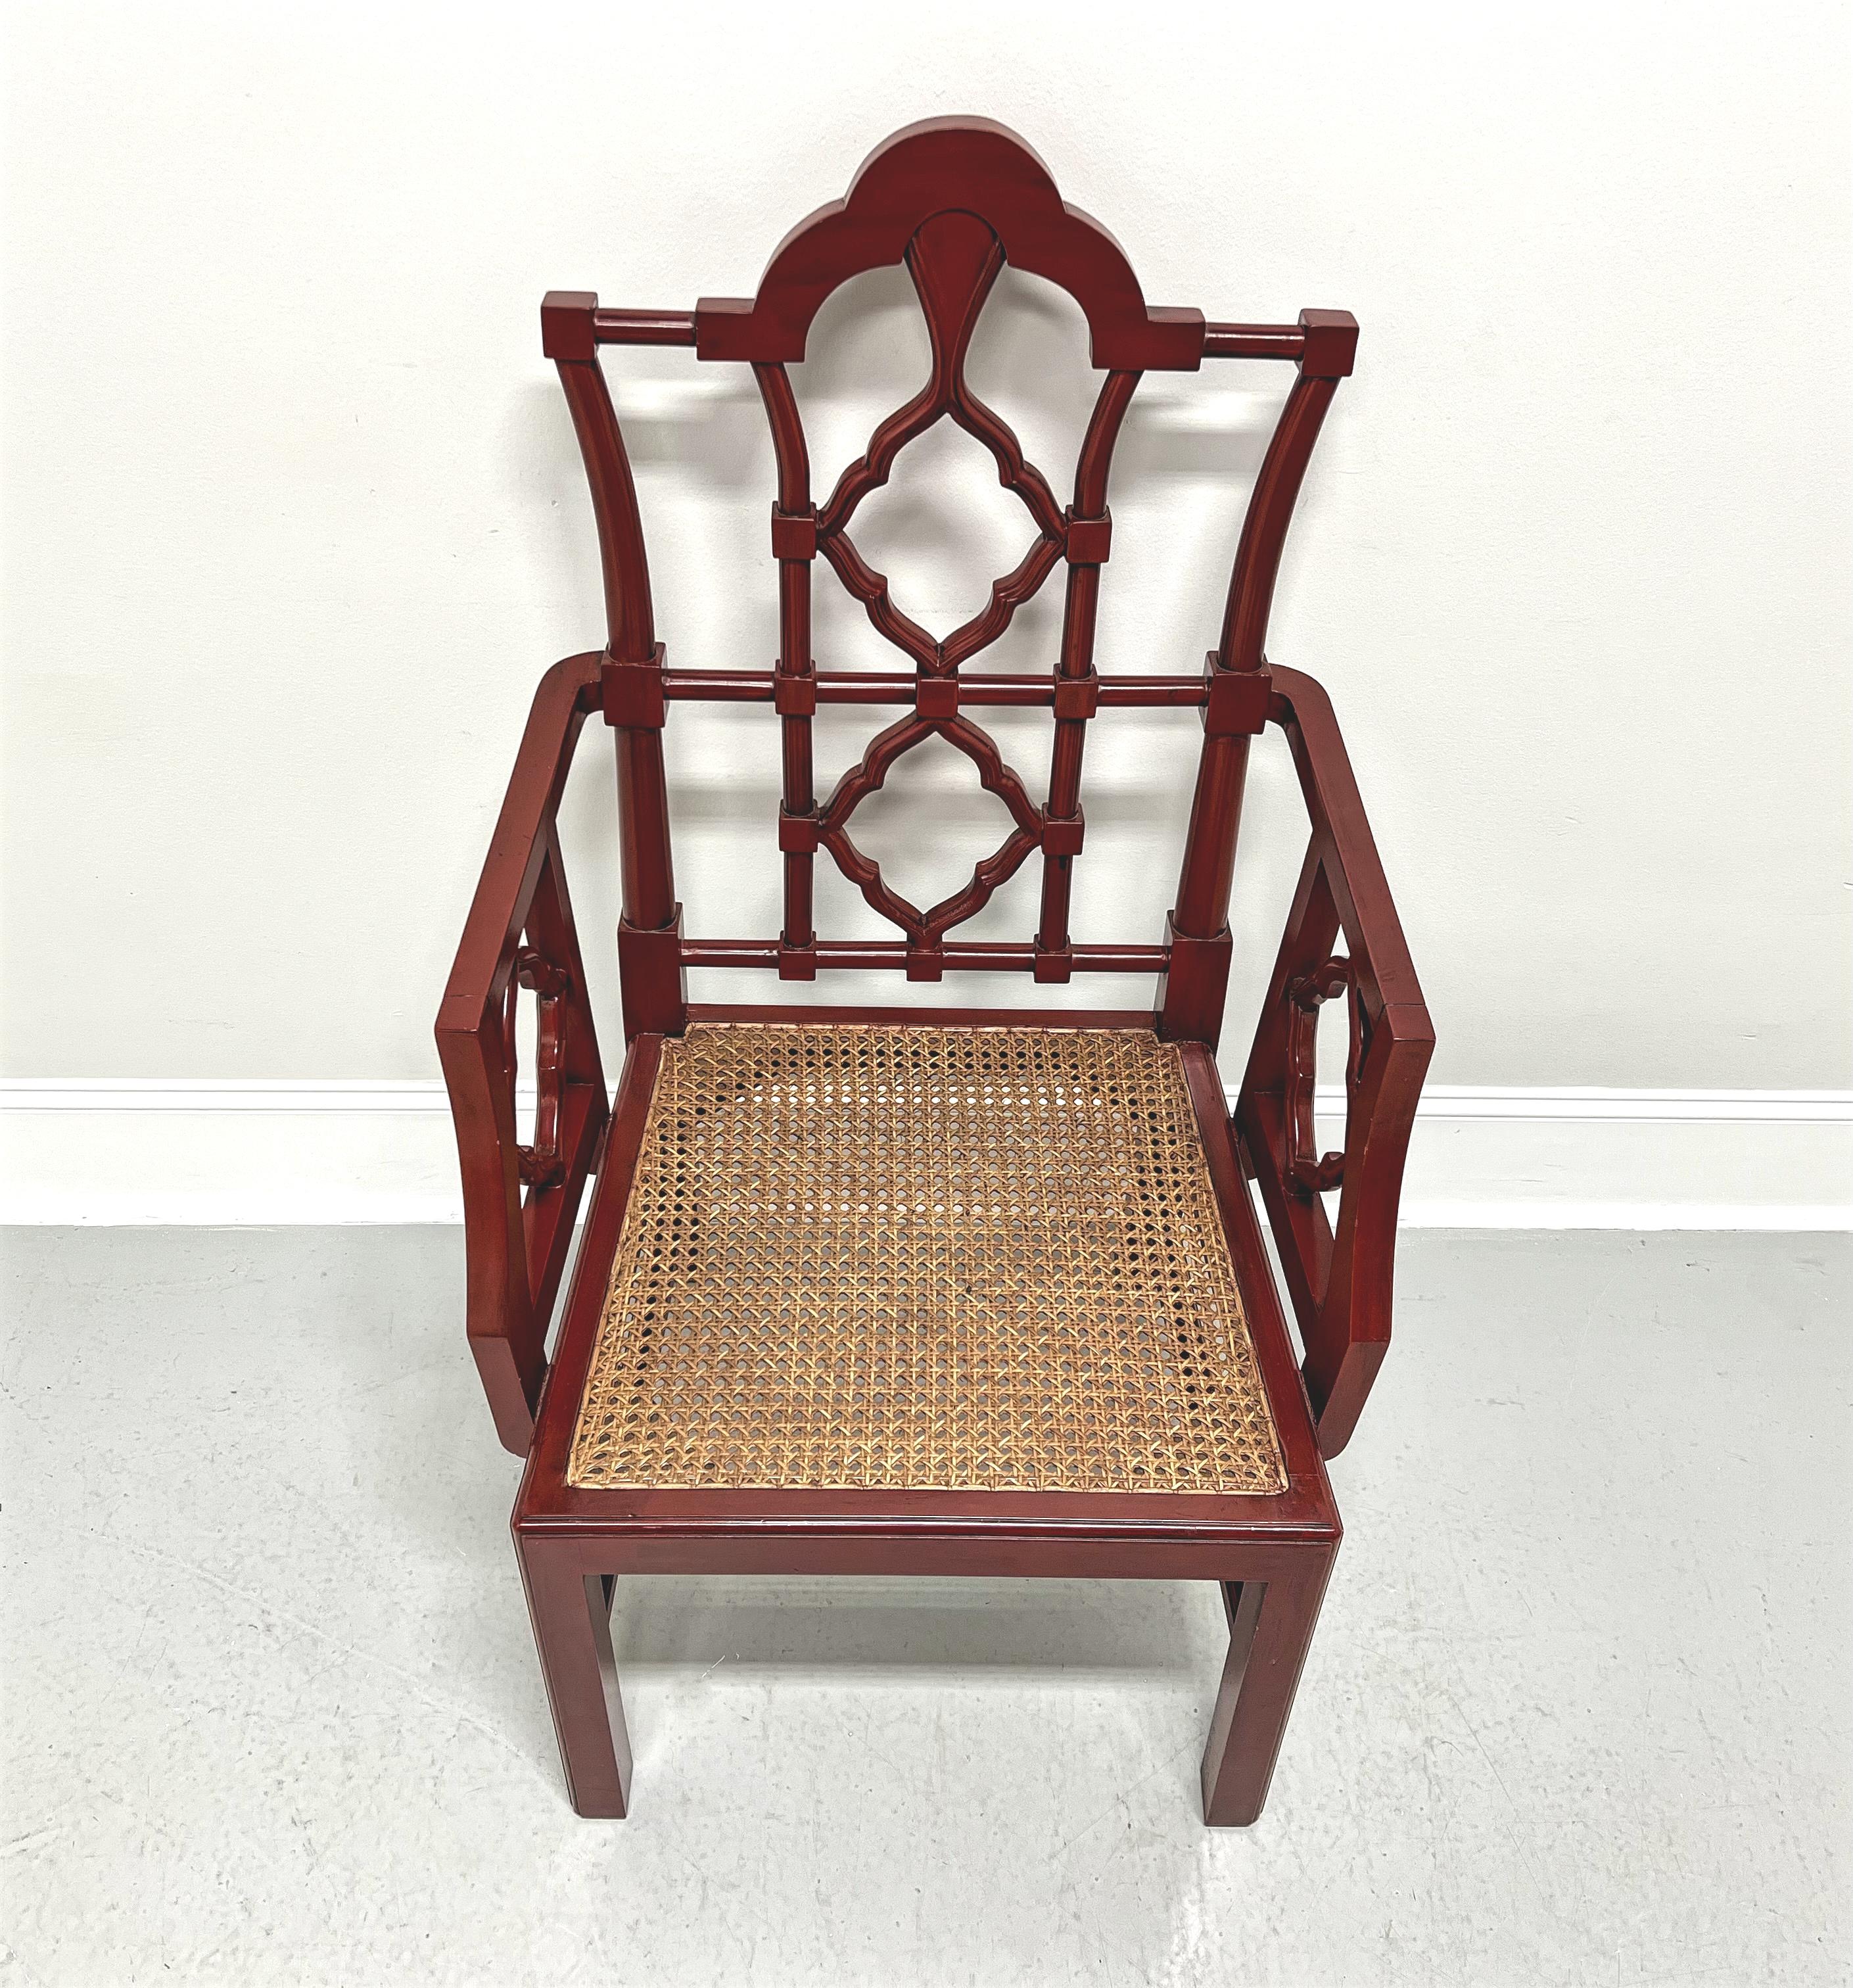 An Asian Chinese Chippendale style armchair, unbranded. Solid wood frame with red lacquer, high back, arched crest rail, decorative back rest with look of bamboo, square arms with decorative lattice, woven caned seat, fluted edge to stretchers, and